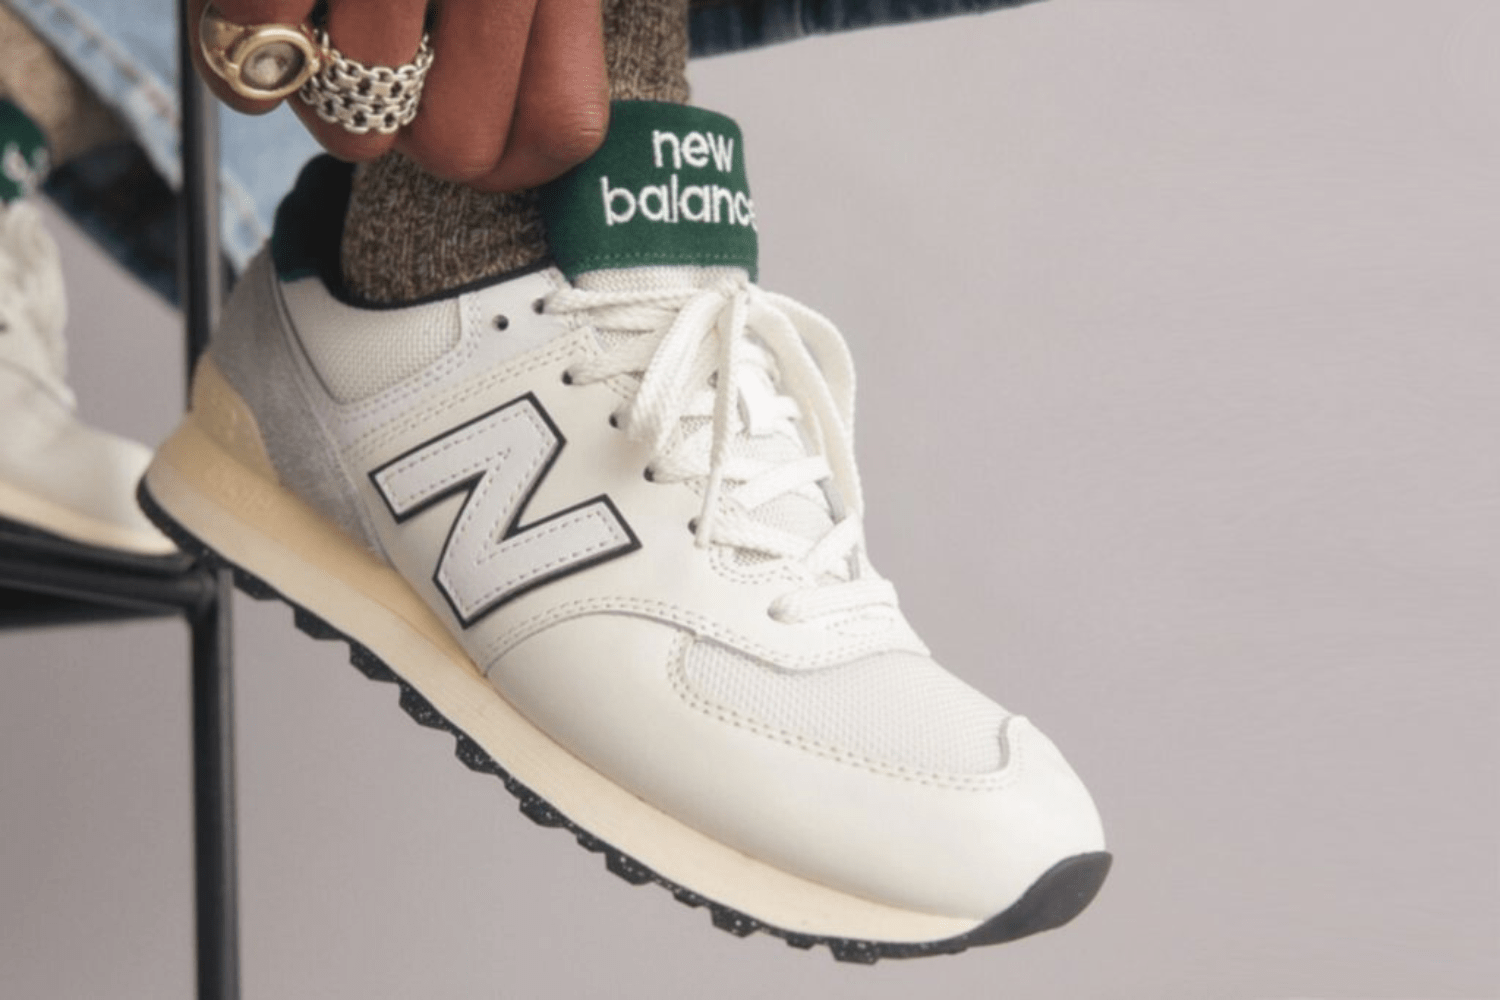 How to style the New Balance 574